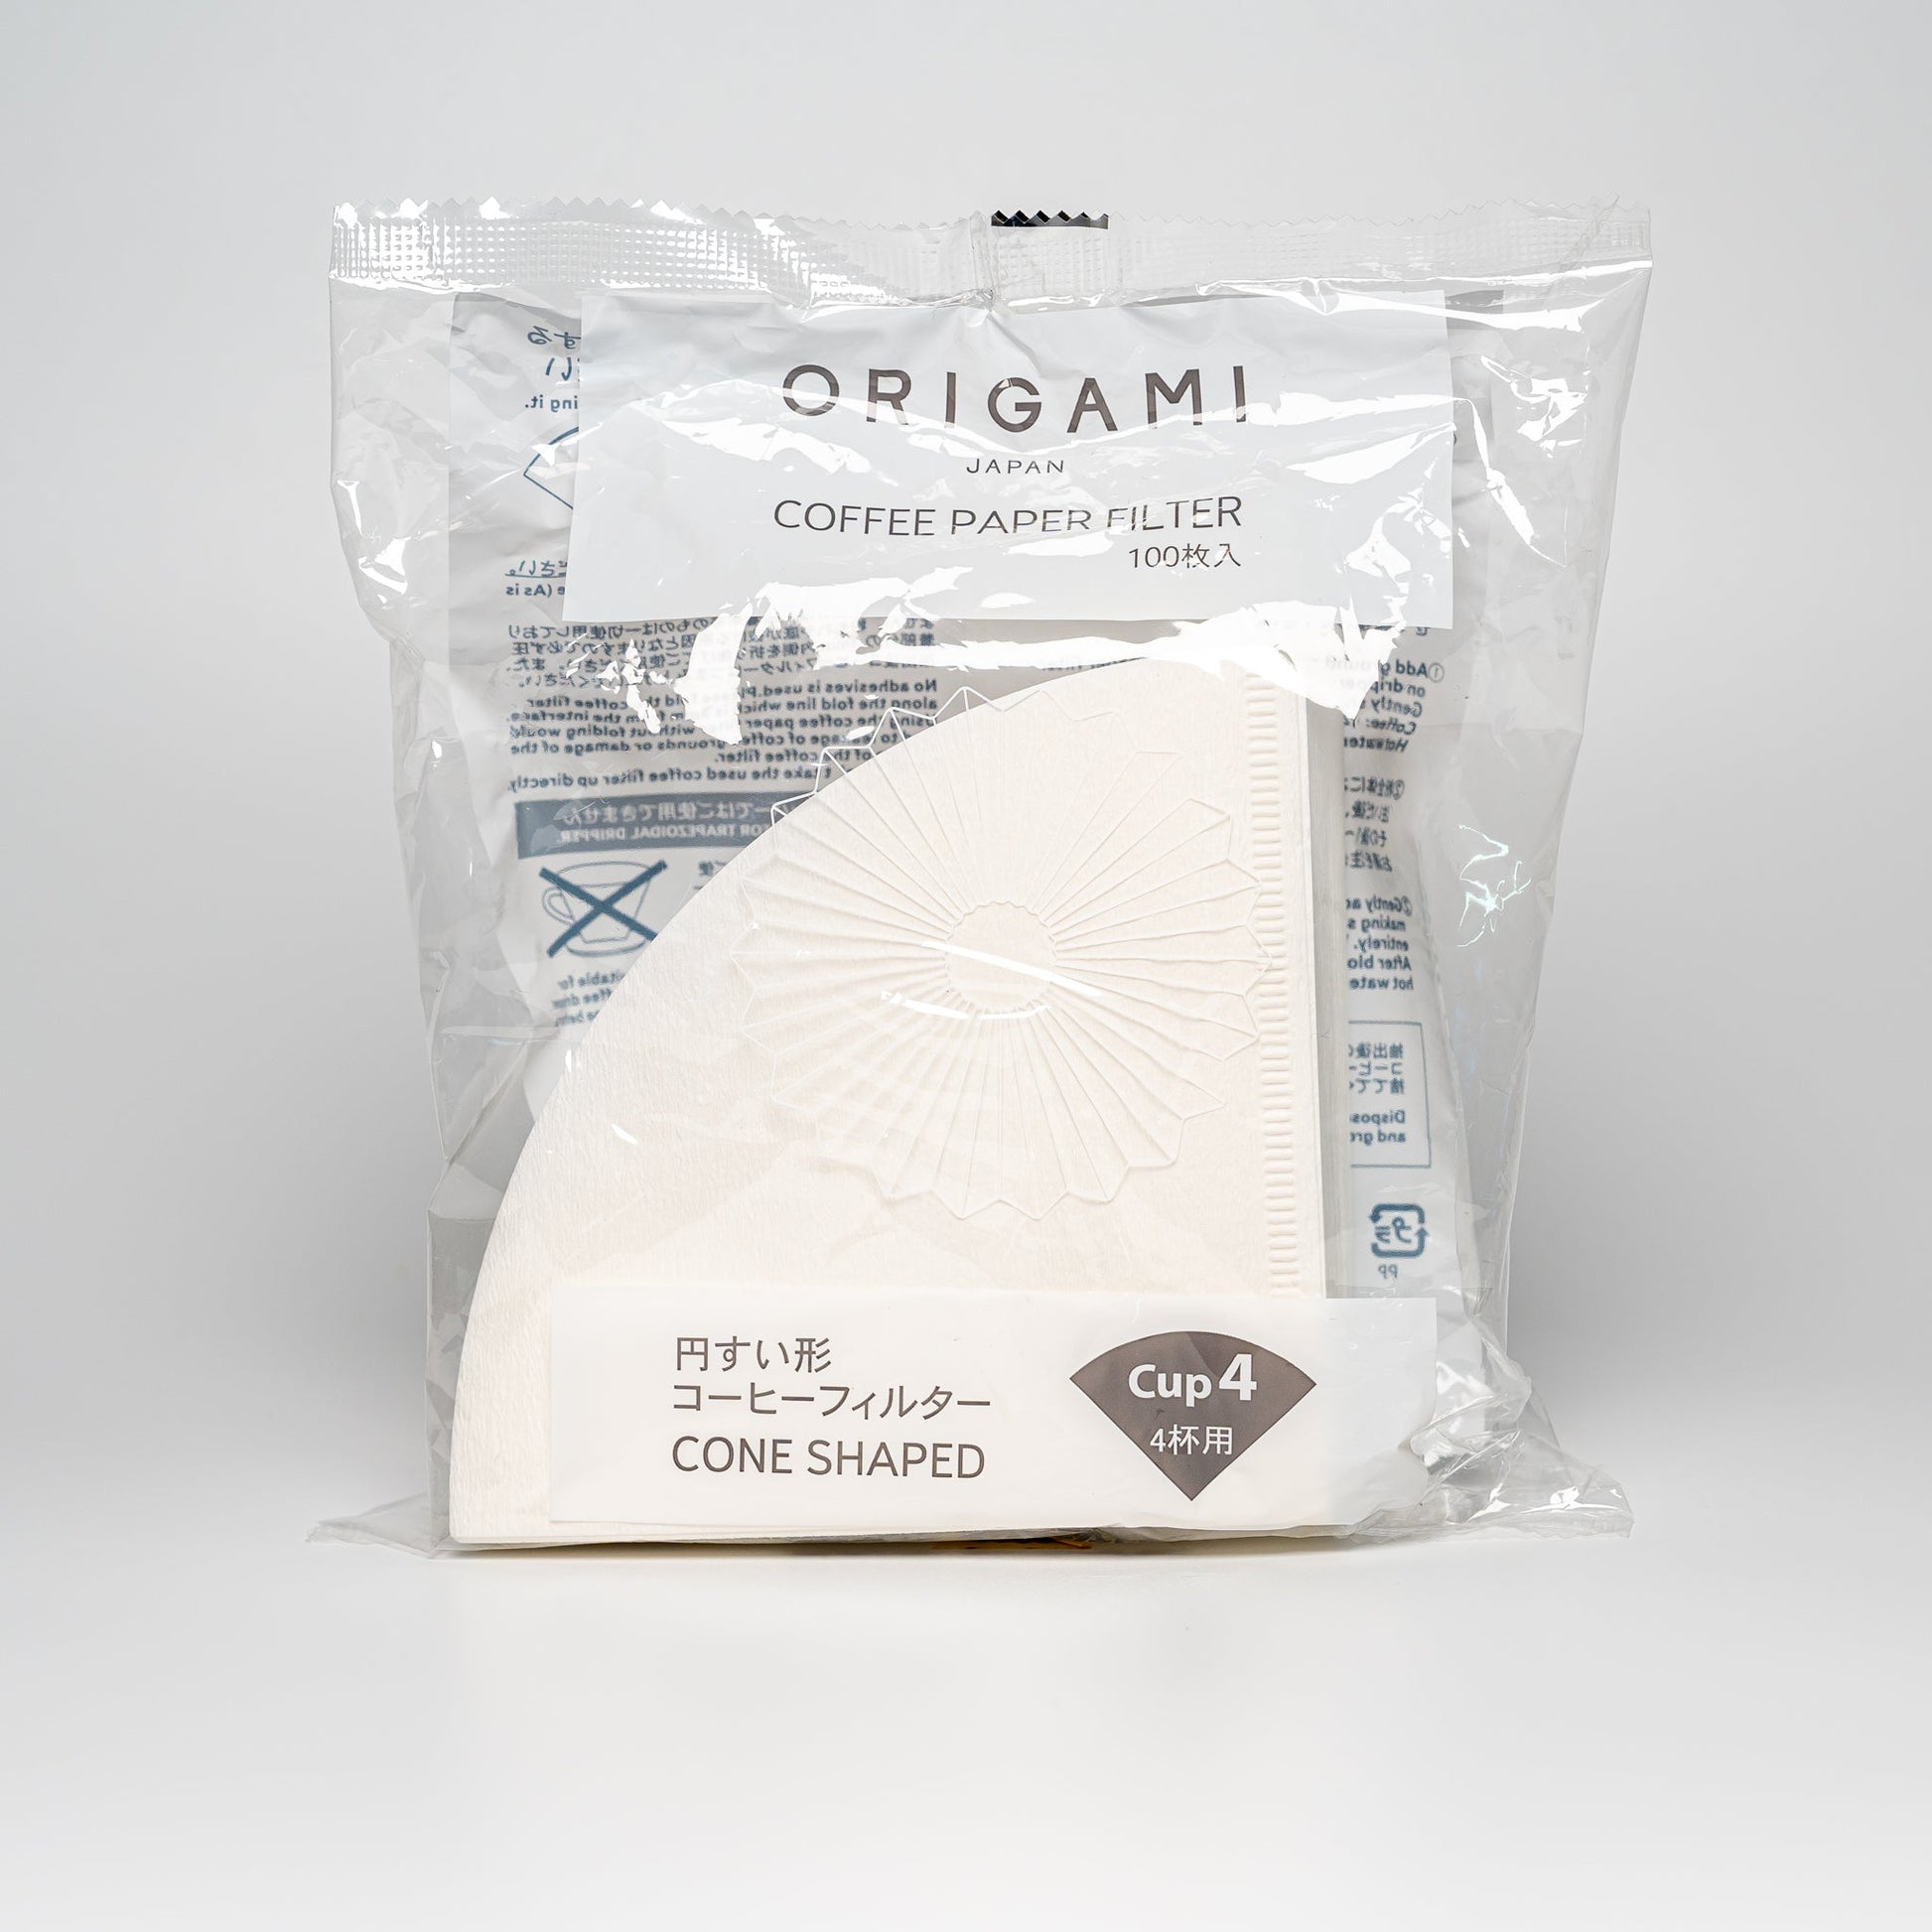 A bag of ORIGAMI coffee filter papers on a white background